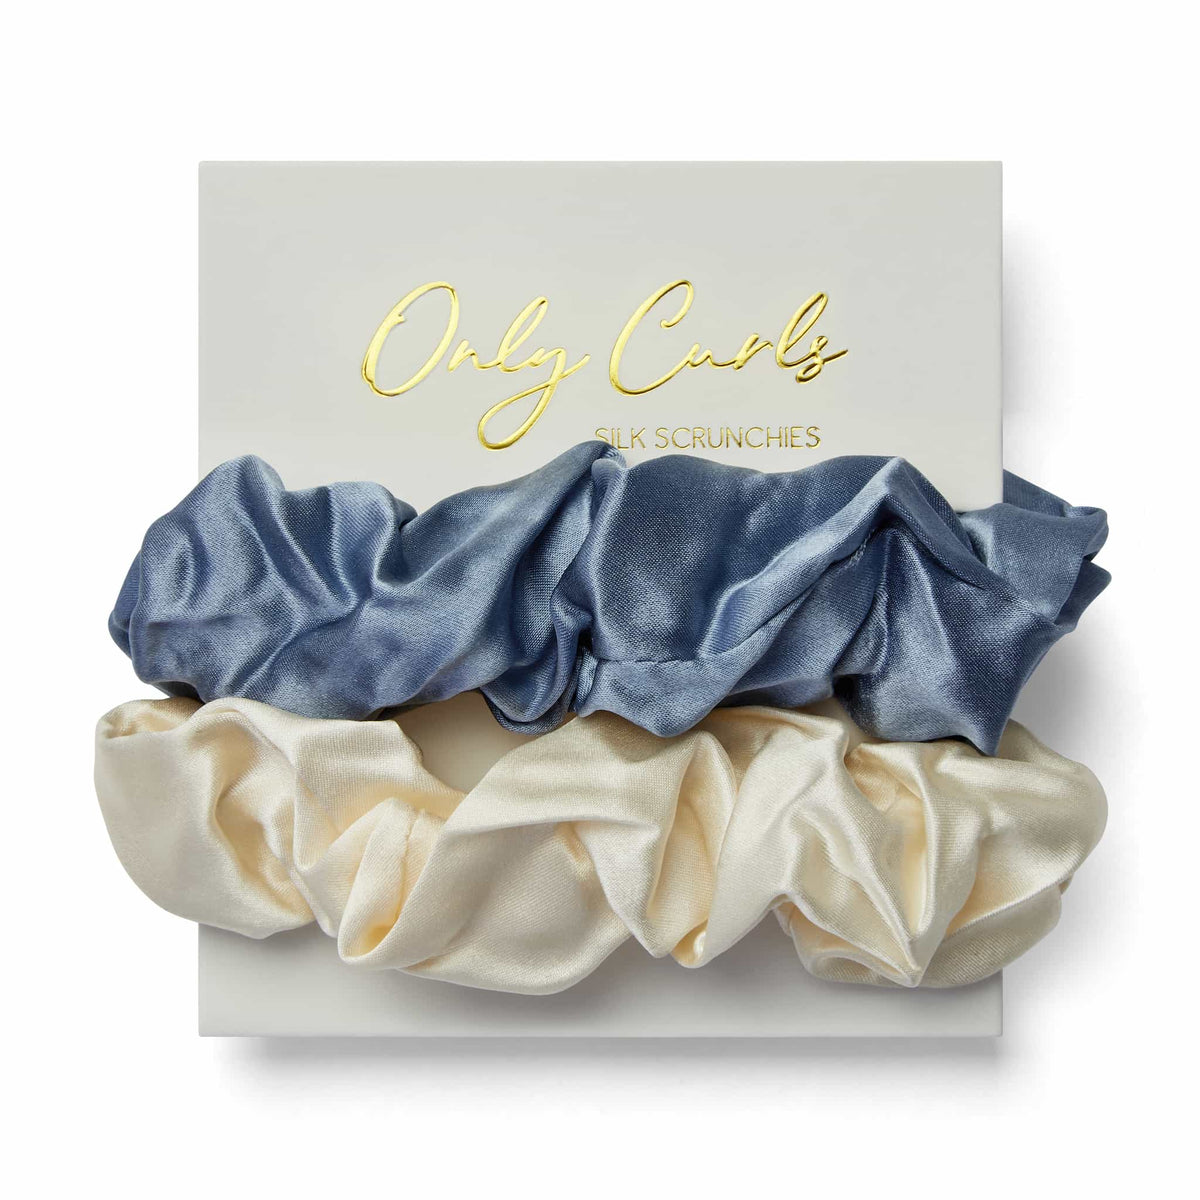 Only Curls Silk Scrunchies Multi Pack - Dusty Blue and Ivory - Only Curls